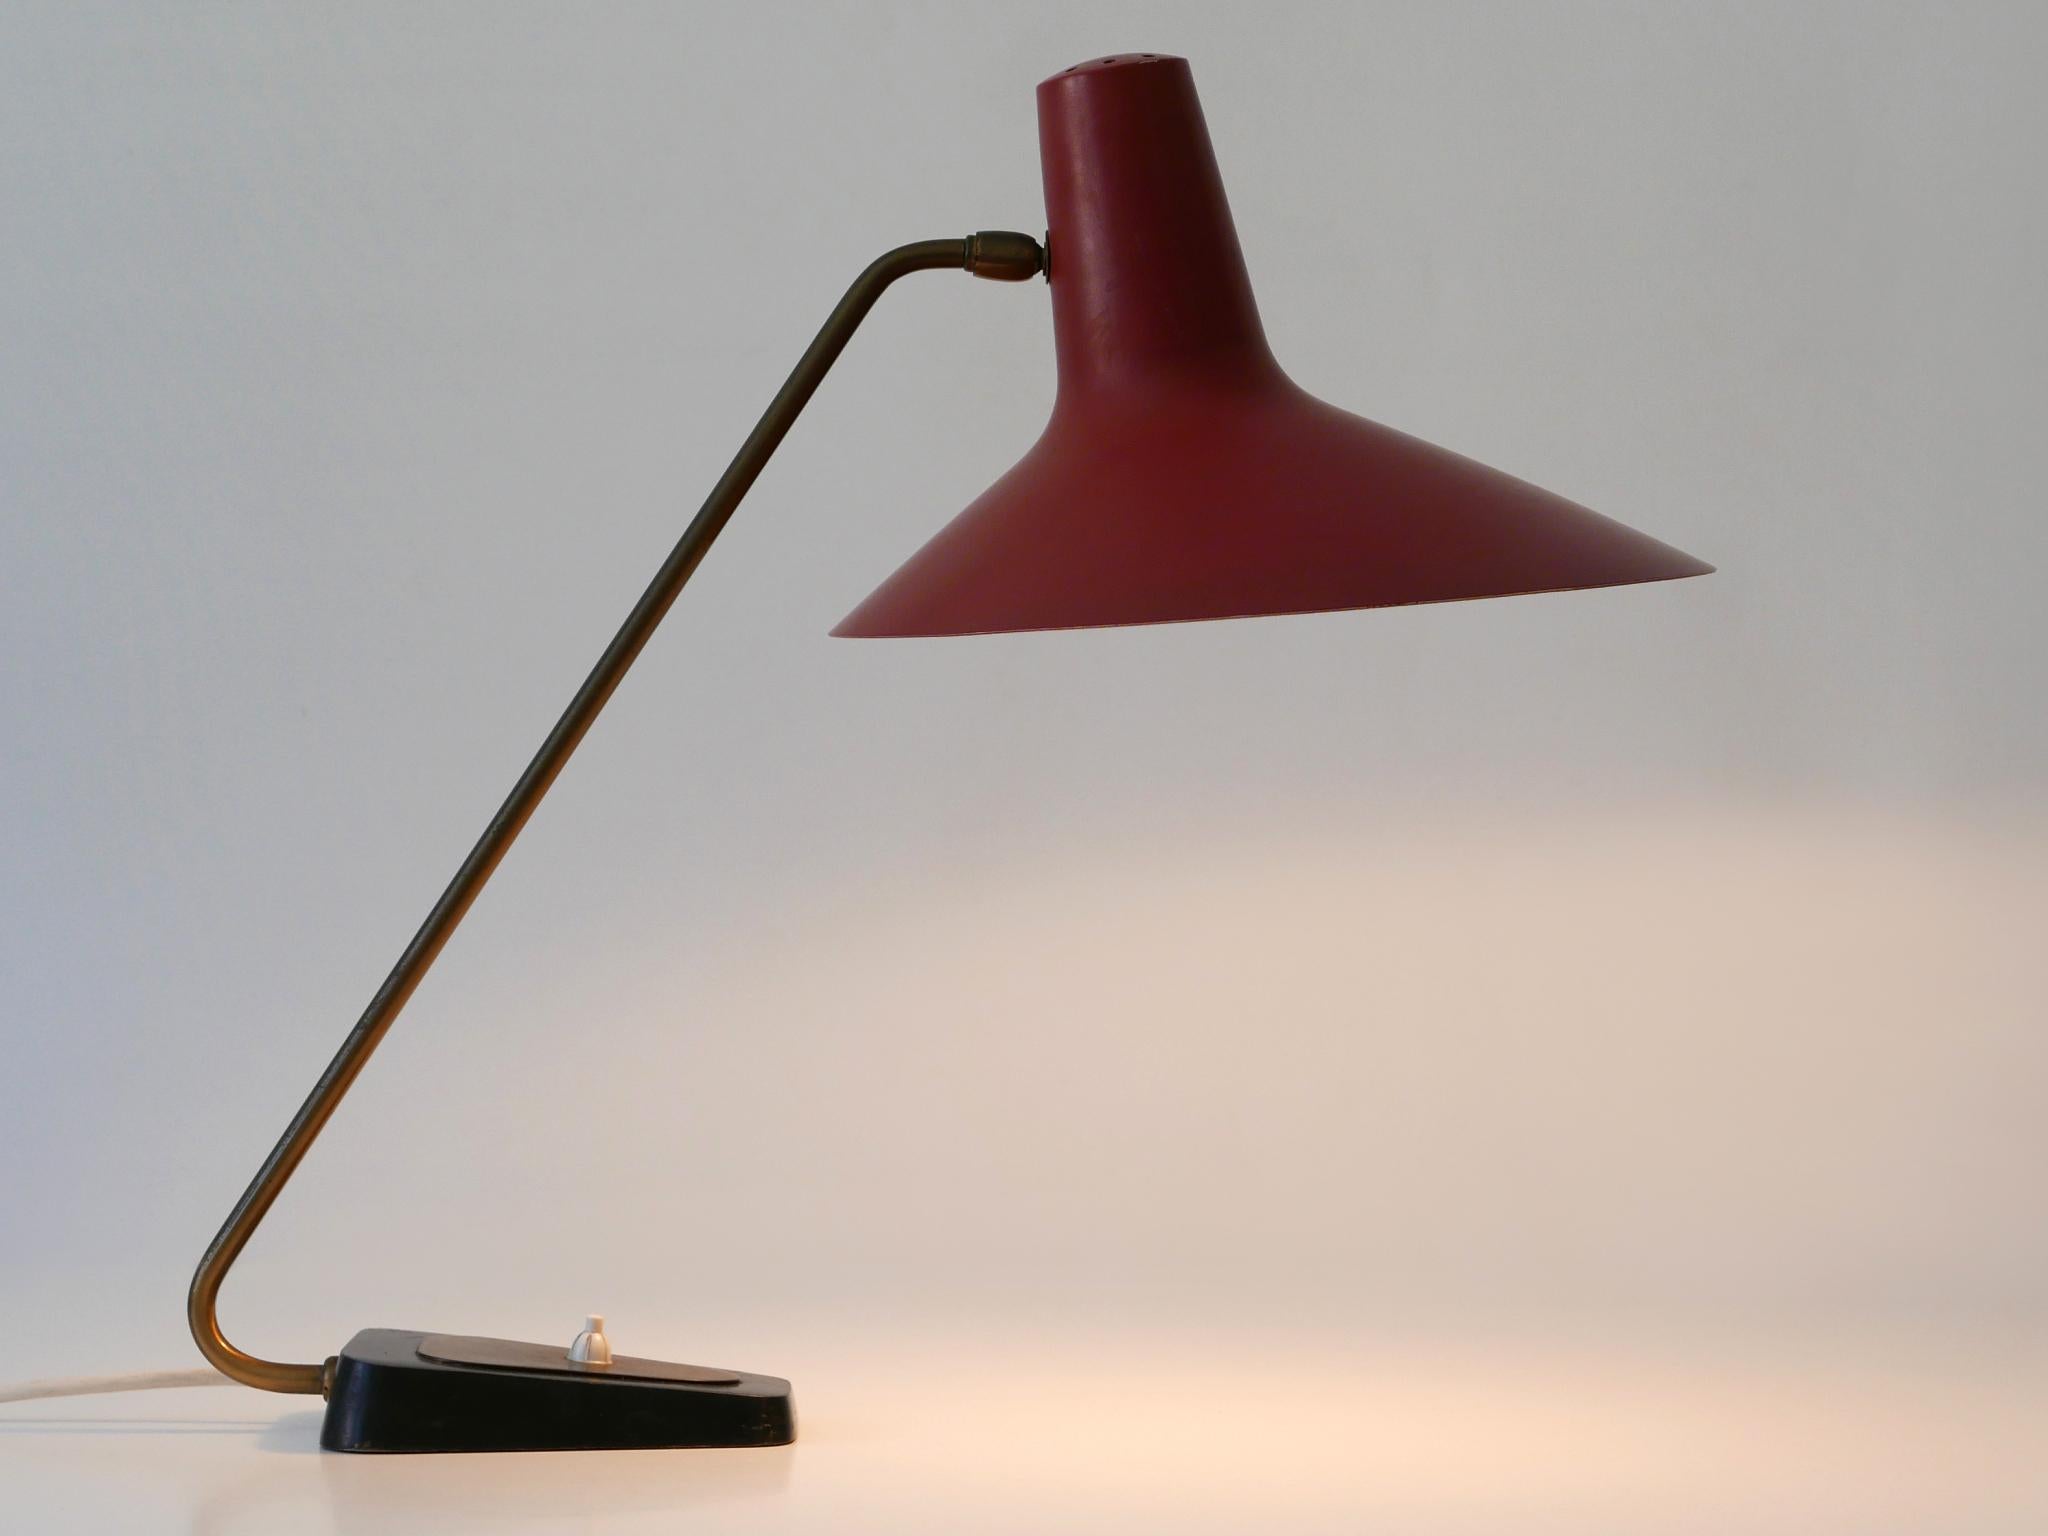 Exceptional Mid-Century Modern Table Lamp by Gebrüder Cosack Germany 1950s For Sale 2